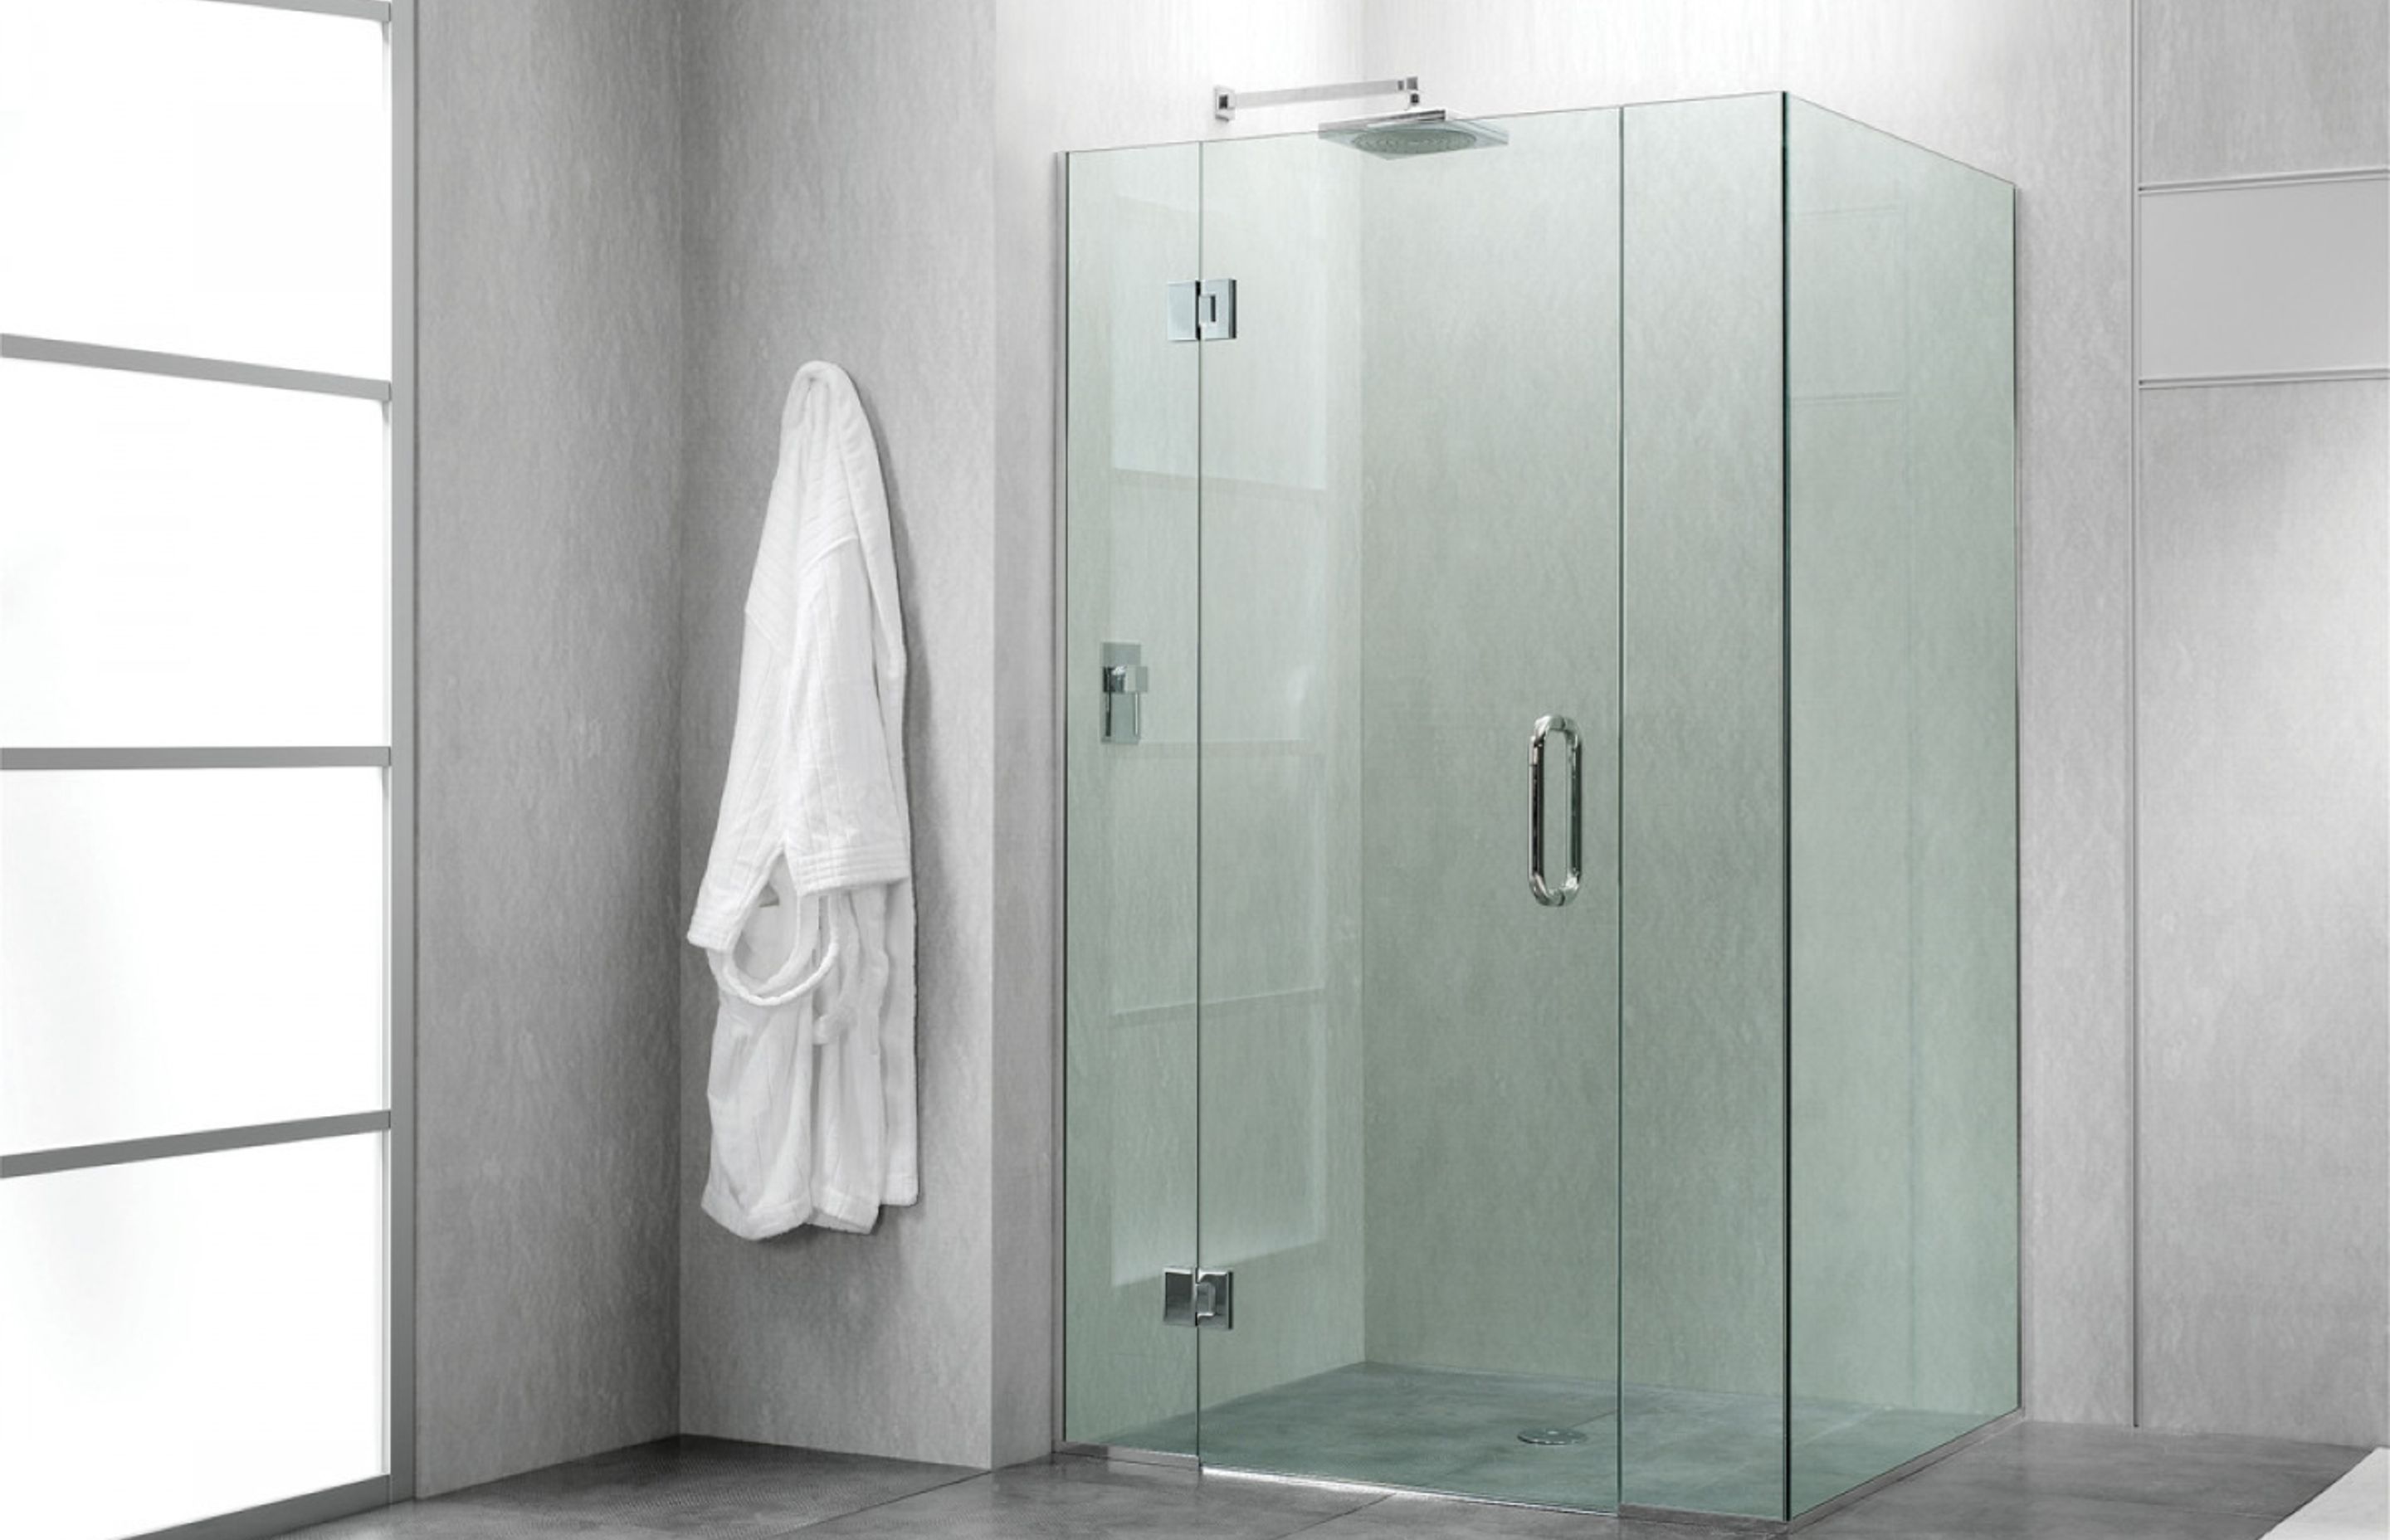 A clean, luxurious and timeless look with the Juralco Frameless Glass Shower.